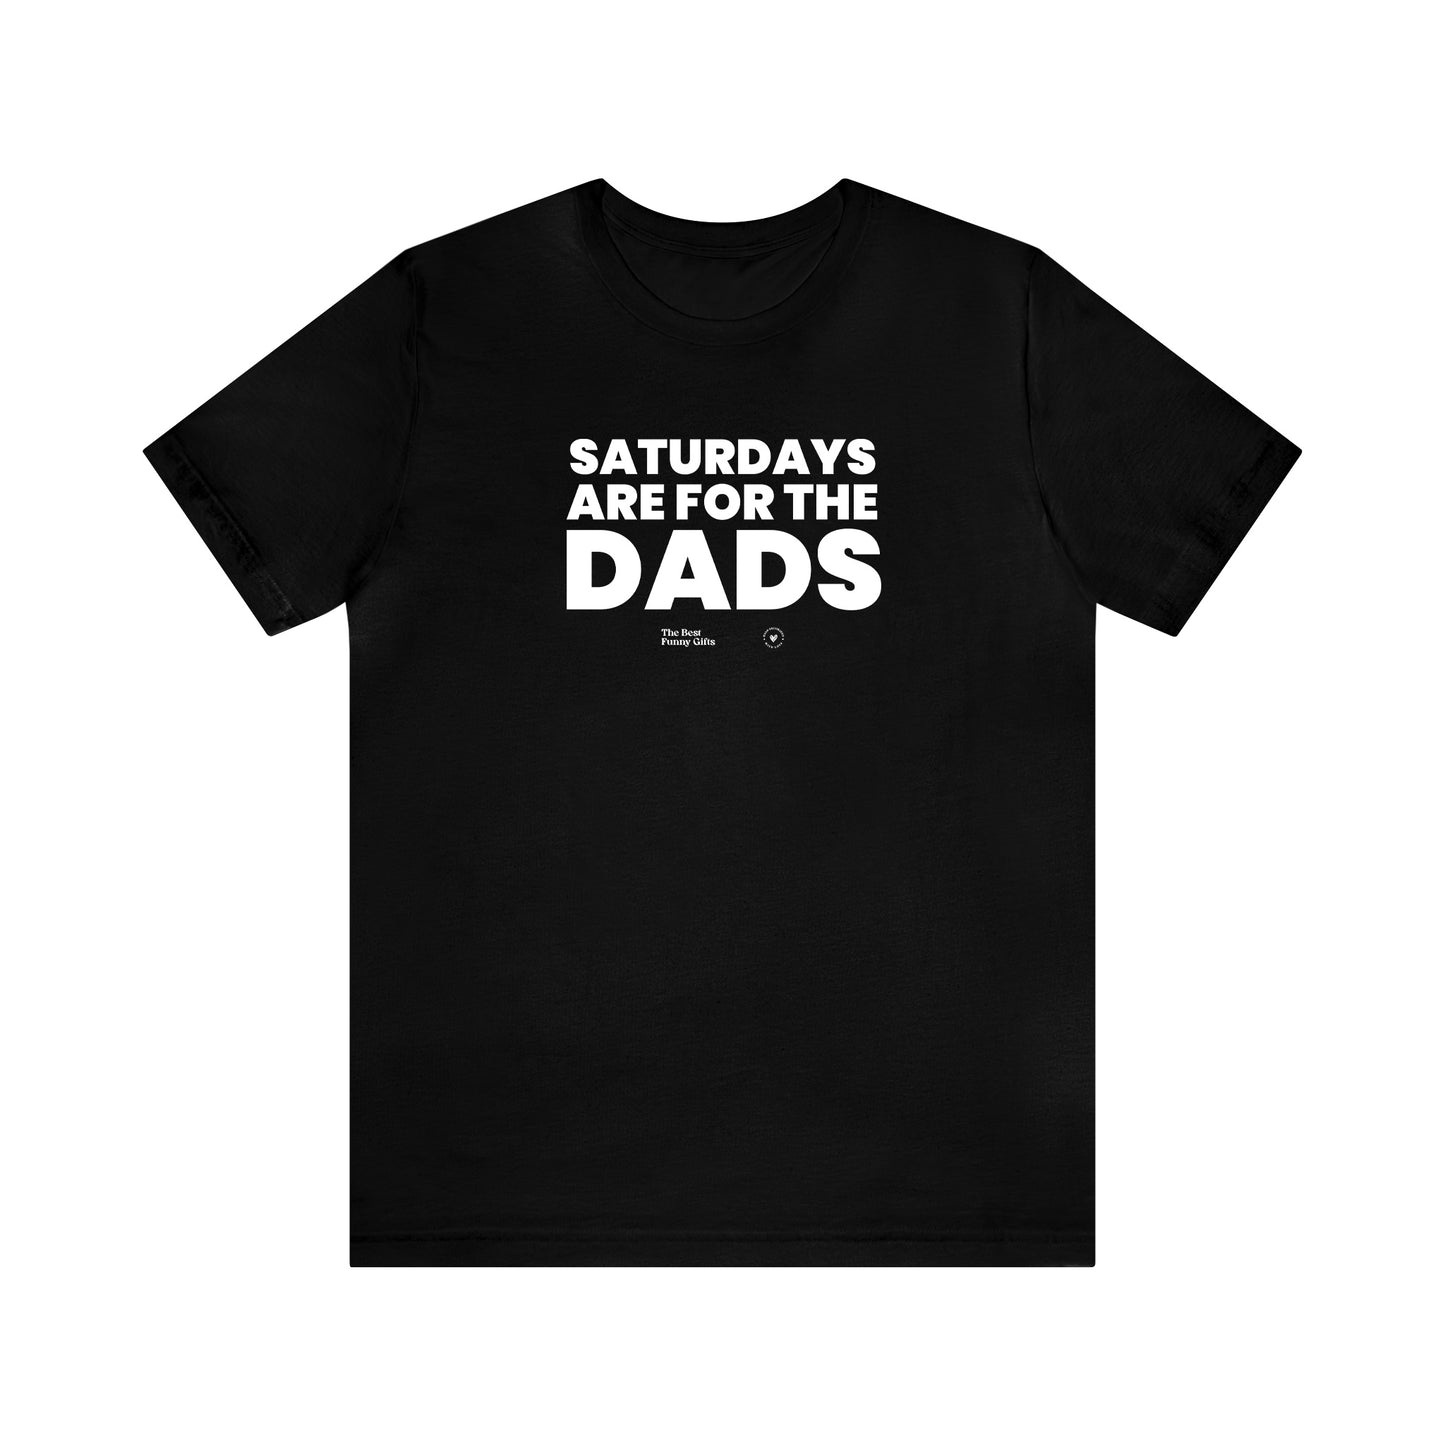 Mens T Shirts - Saturdays Are for the Dads - Funny Men T Shirts